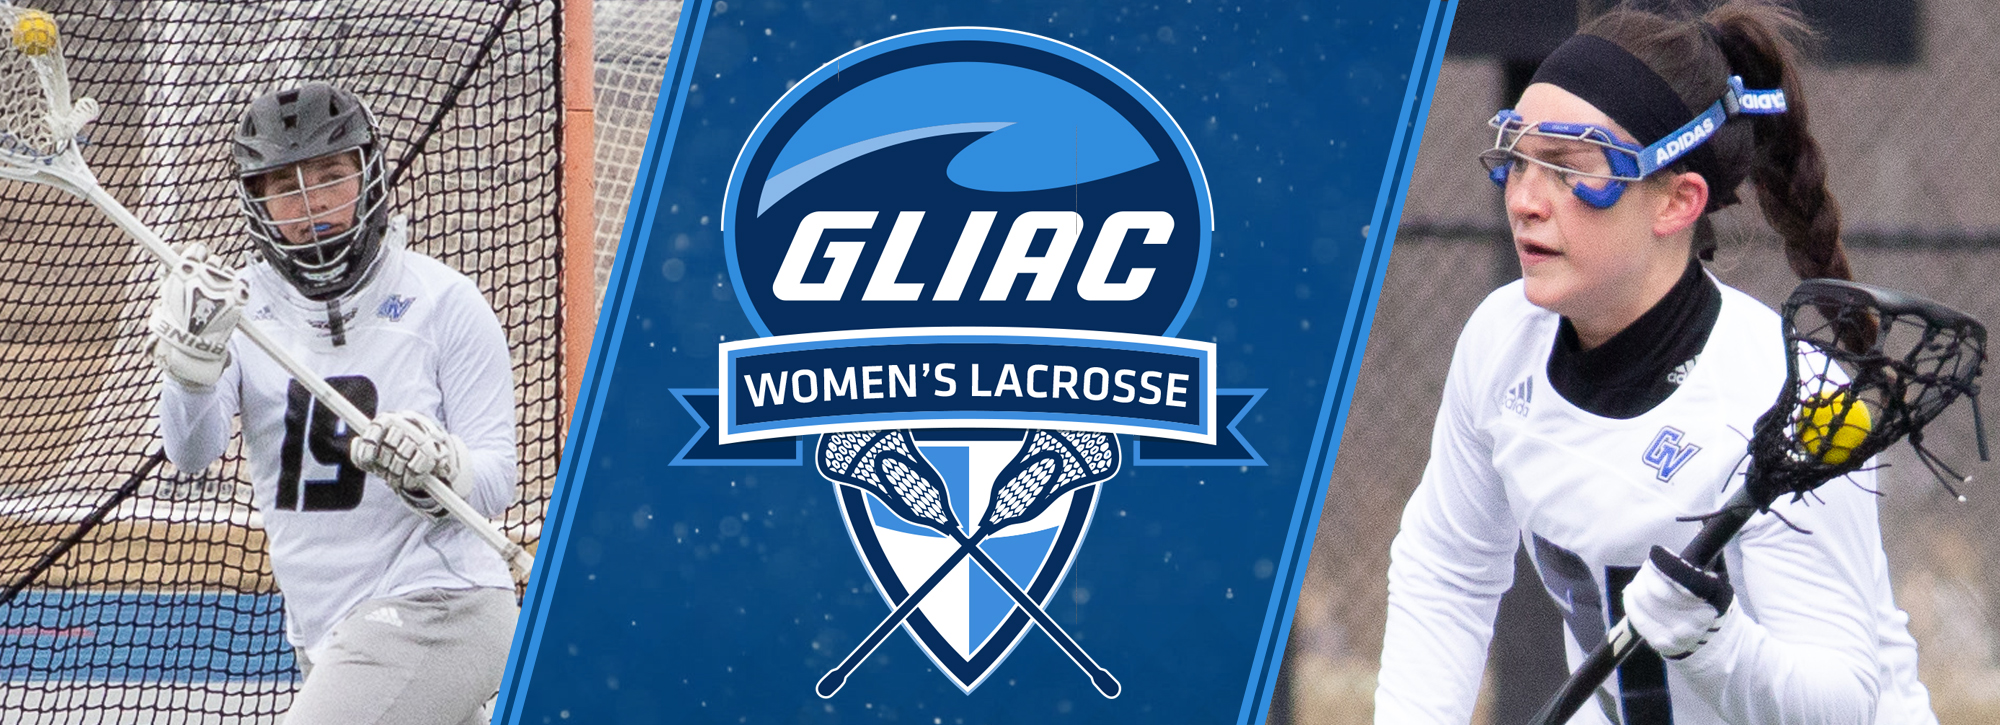 GVSU's Neil and Fitzgerald sweep lacrosse player of the week awards